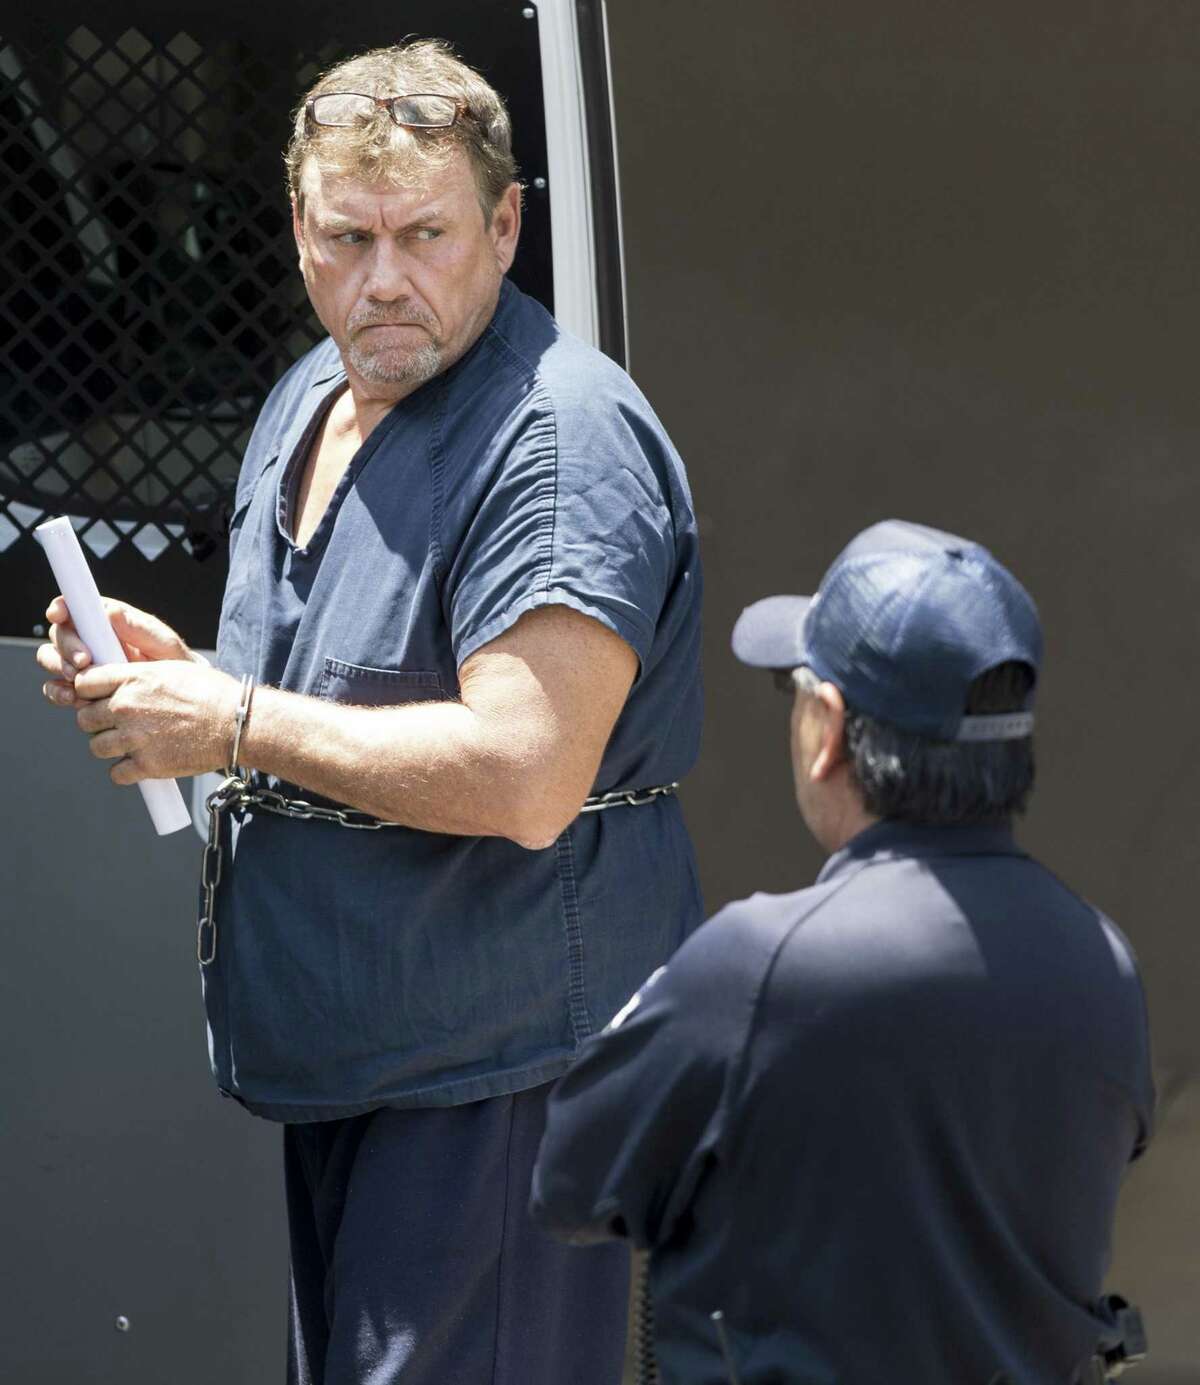 Robert Ussery, is escorted Thursday, May 24, 2018 out of the federal courthouse after appearing before U.S. Magistrate Judge Henry Bemporad. He faces a federal charge with approaching Sutherland Springs pastor Frank Pomeroy on March 5 and telling him that his daughter, slain in the November massacre, never existed.